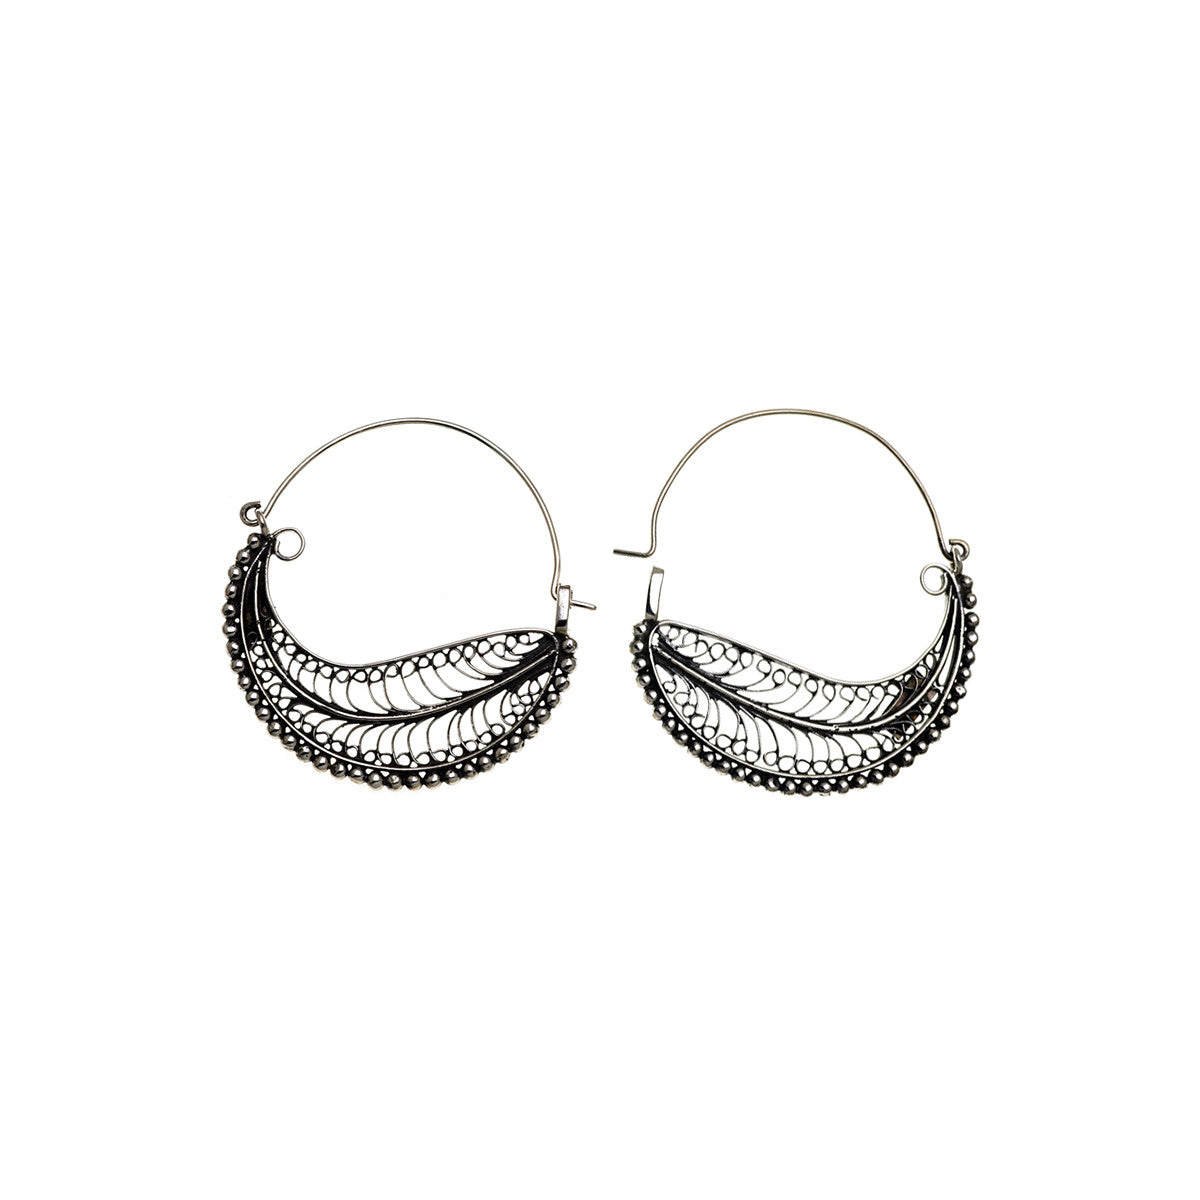 Chand Bali Small Feather Sterling Silver Hoop Earring - Cynthia Gale New York Jewelry